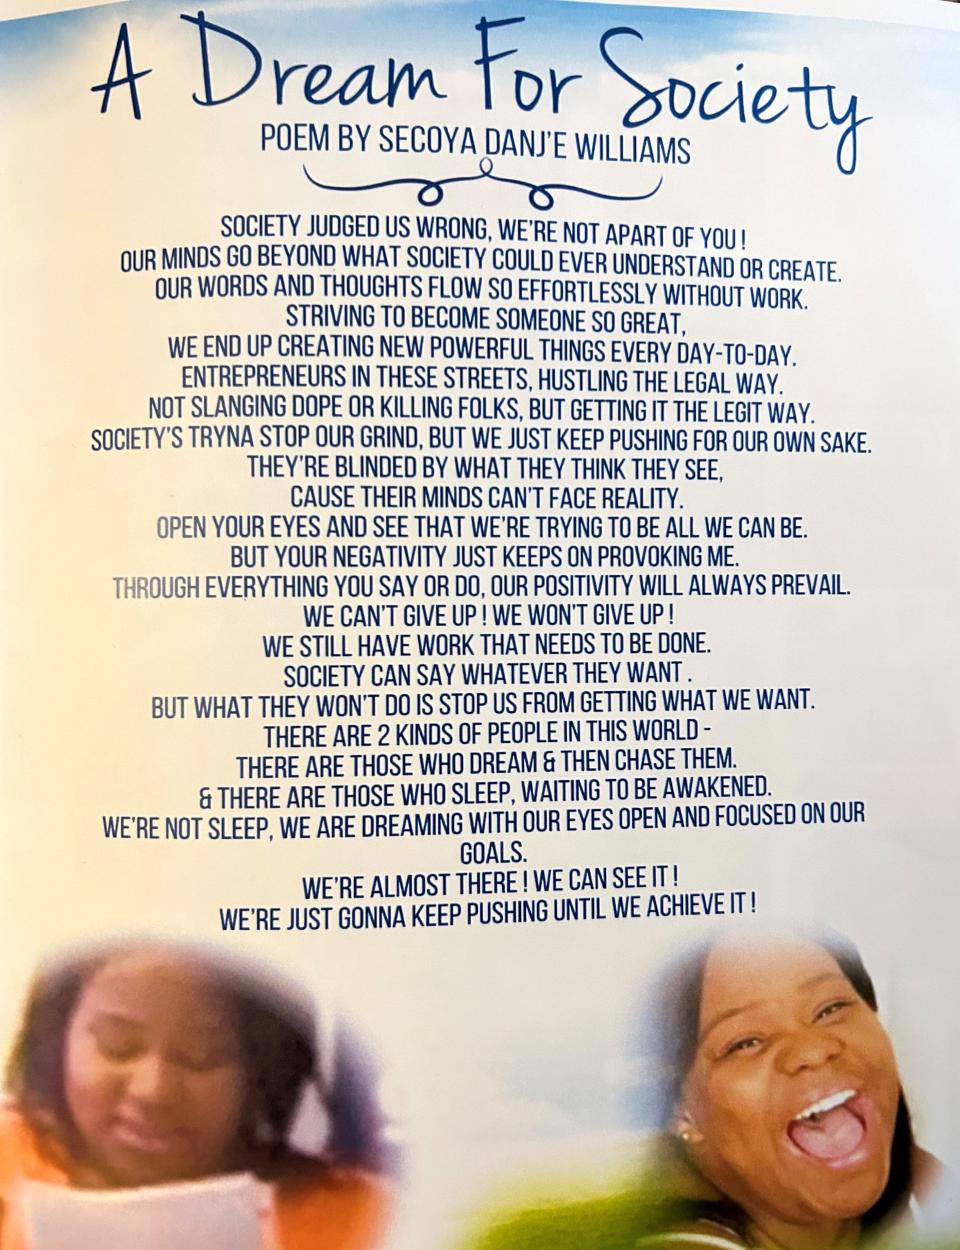 A poem written by Secoya Williams includes the line: "We still have work that needs to be done." Her mother, Marilyn Johnson, said the line is a message to the family "not to give up.”